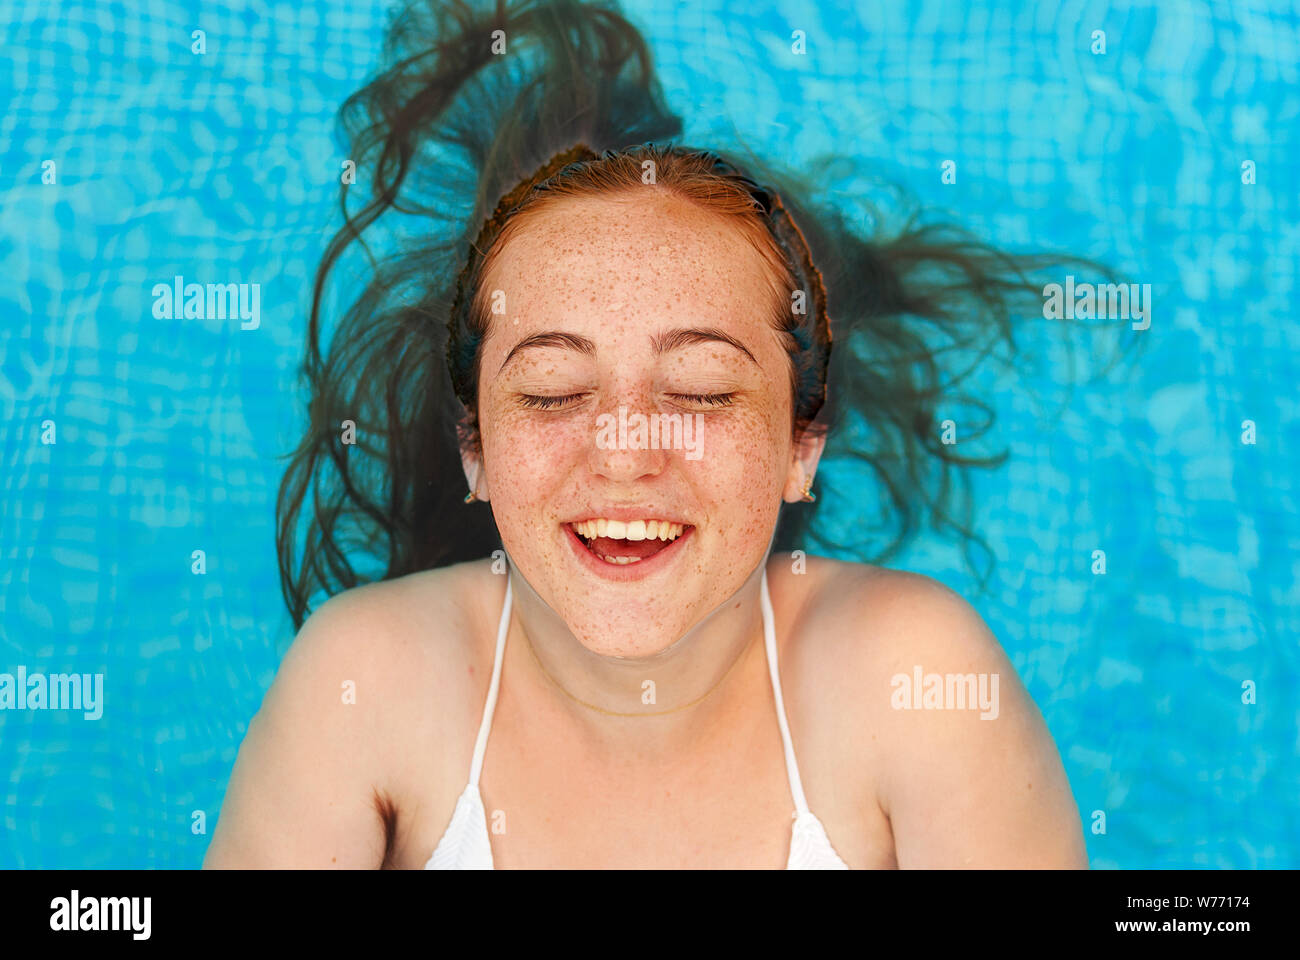 Teenager. Young woman with freckles into the swimming pool. Smiling. Stock Photo